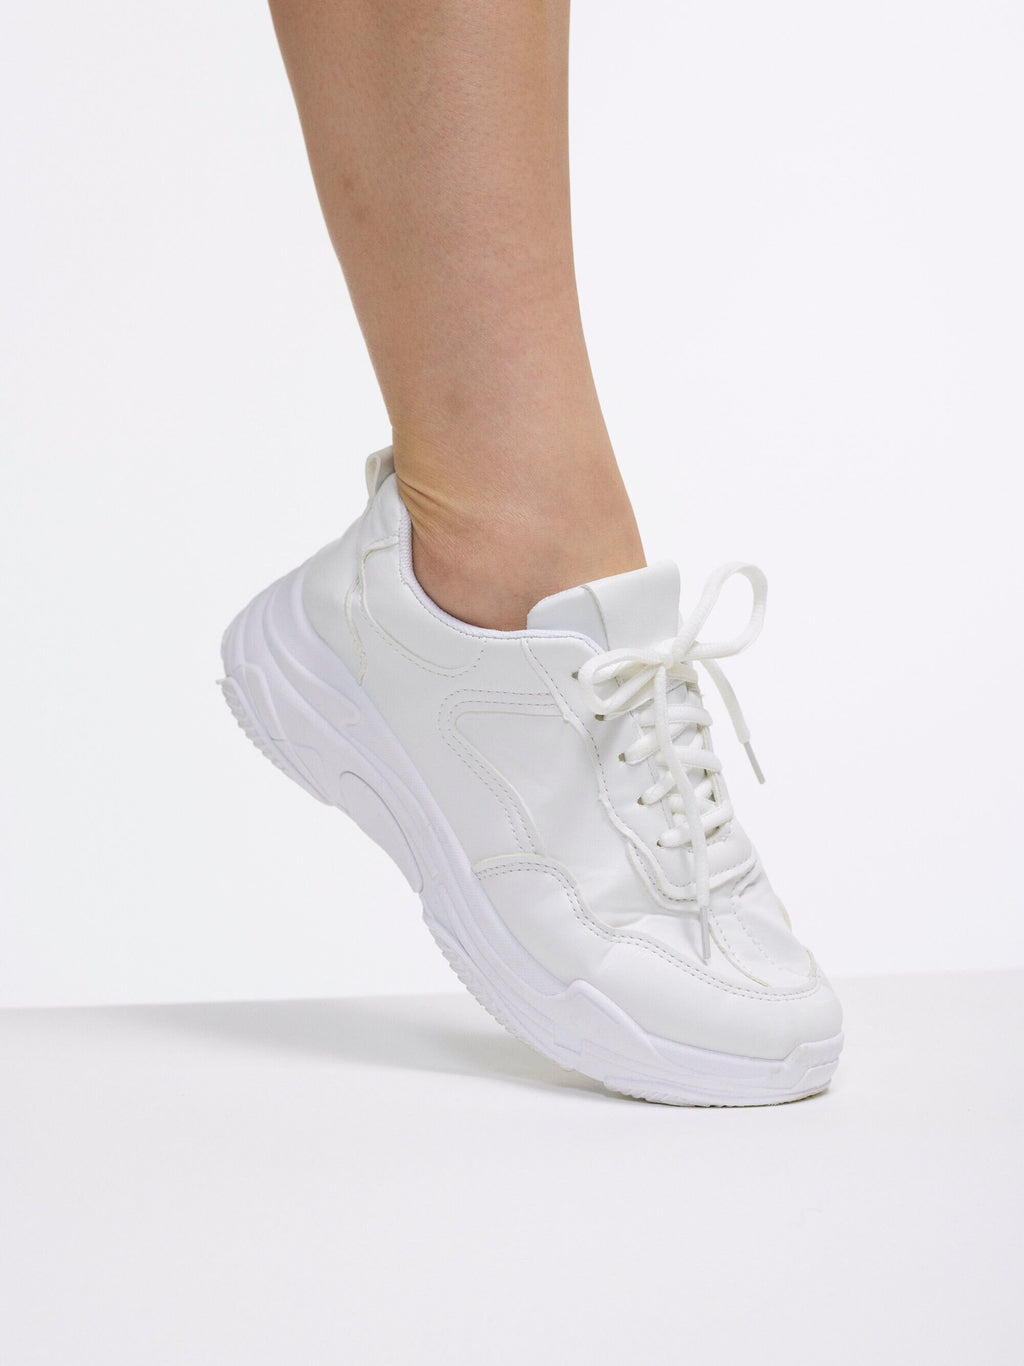 The Perfect Simple Chunky White Sneaker | Cool Yet Sensible for Every Day Wear | All White Lace Up Running Shoe Style | Goose Taffy